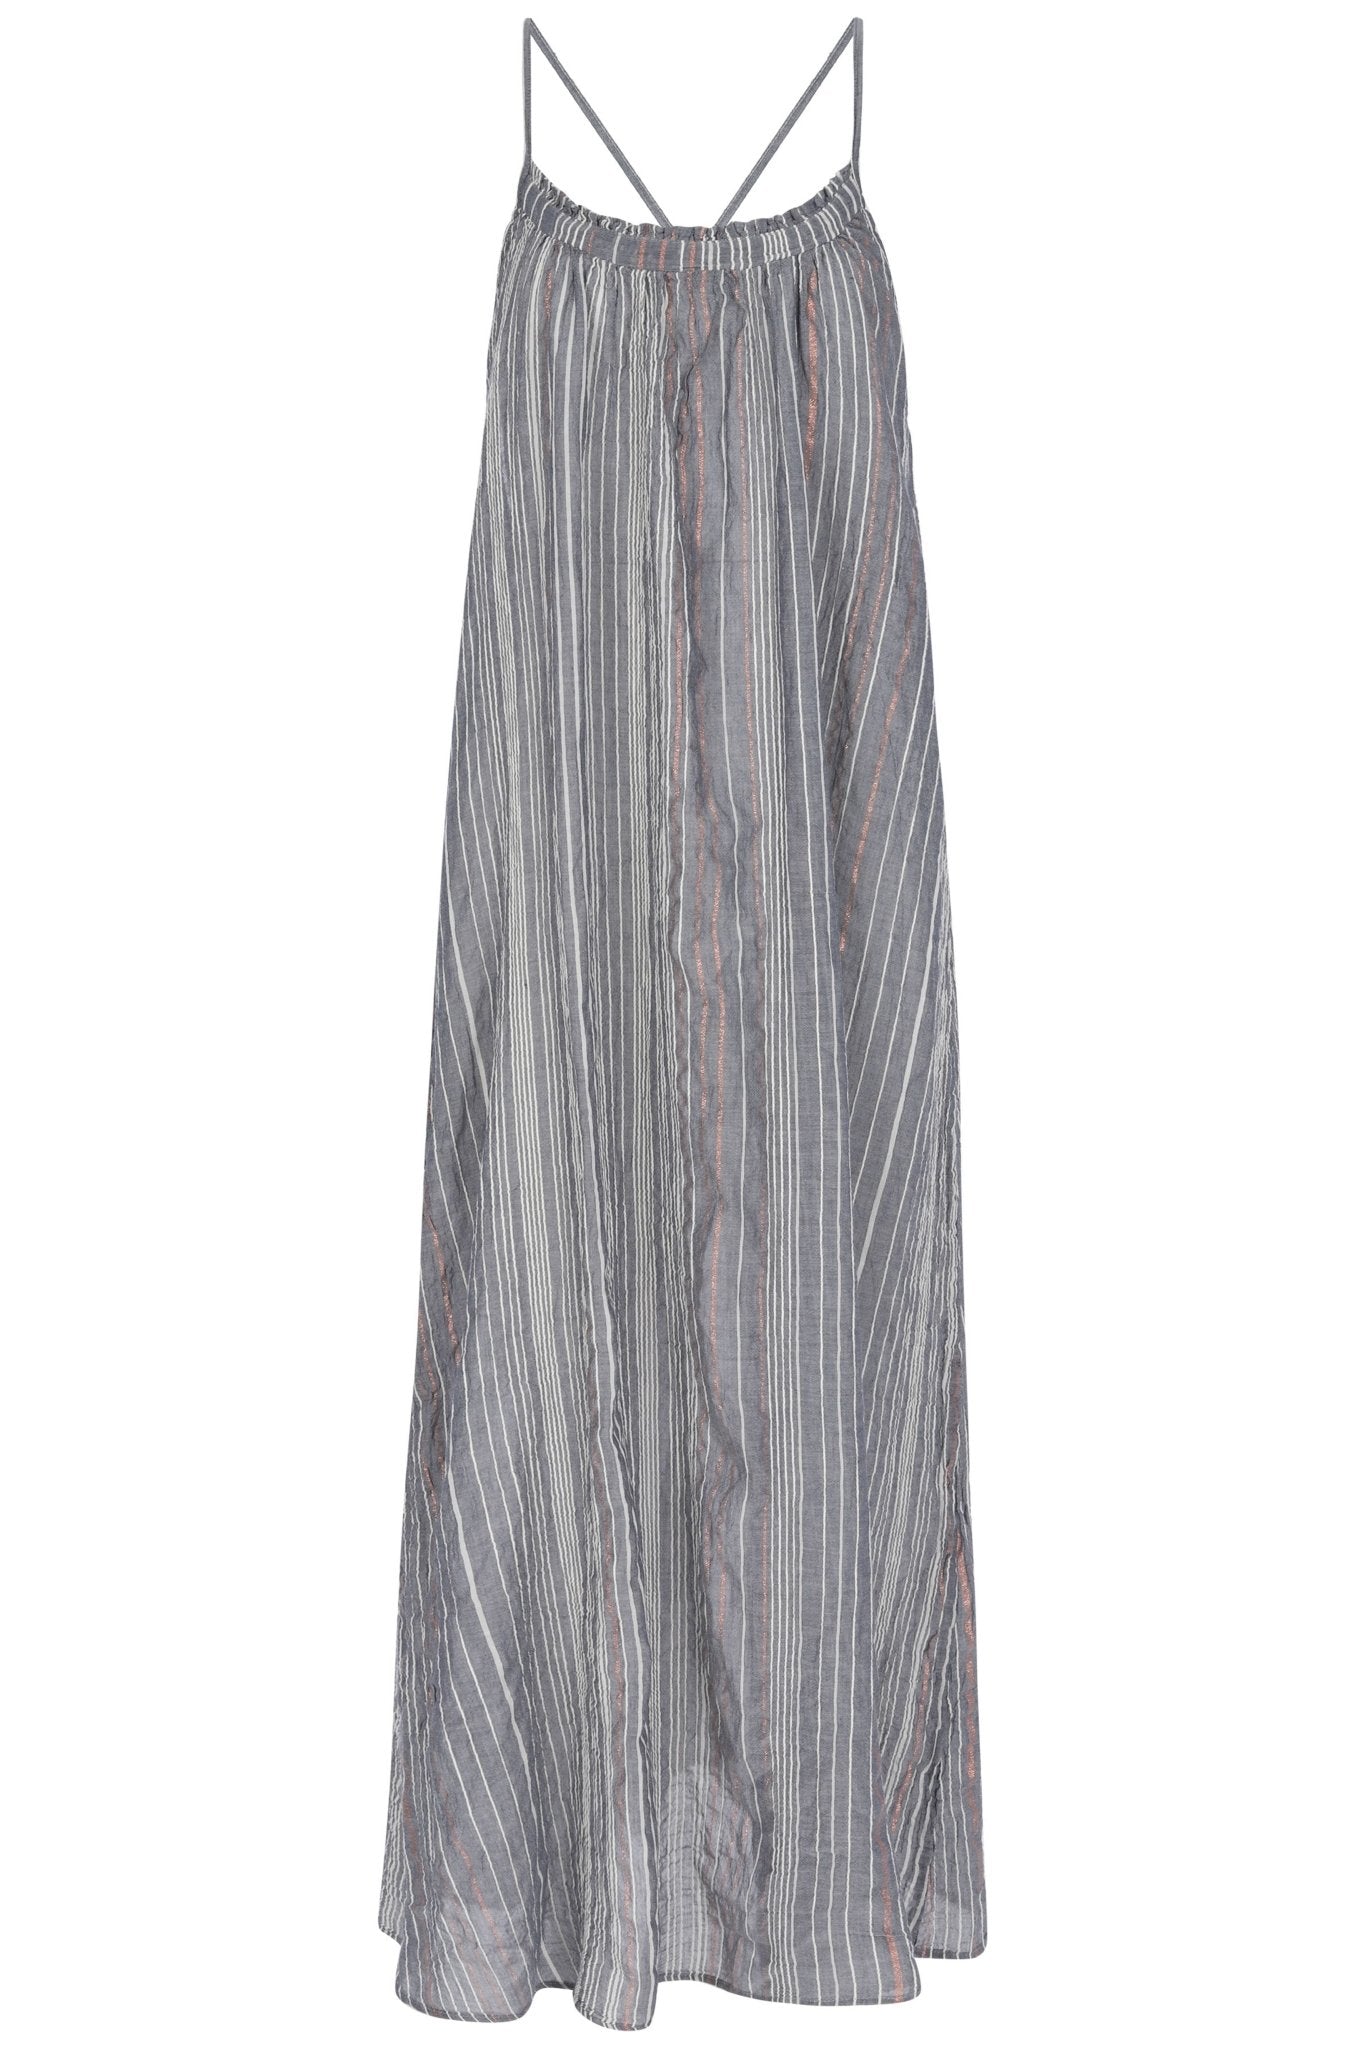 Canggu Maxi Dress - Navy With Stripes by The Handloom